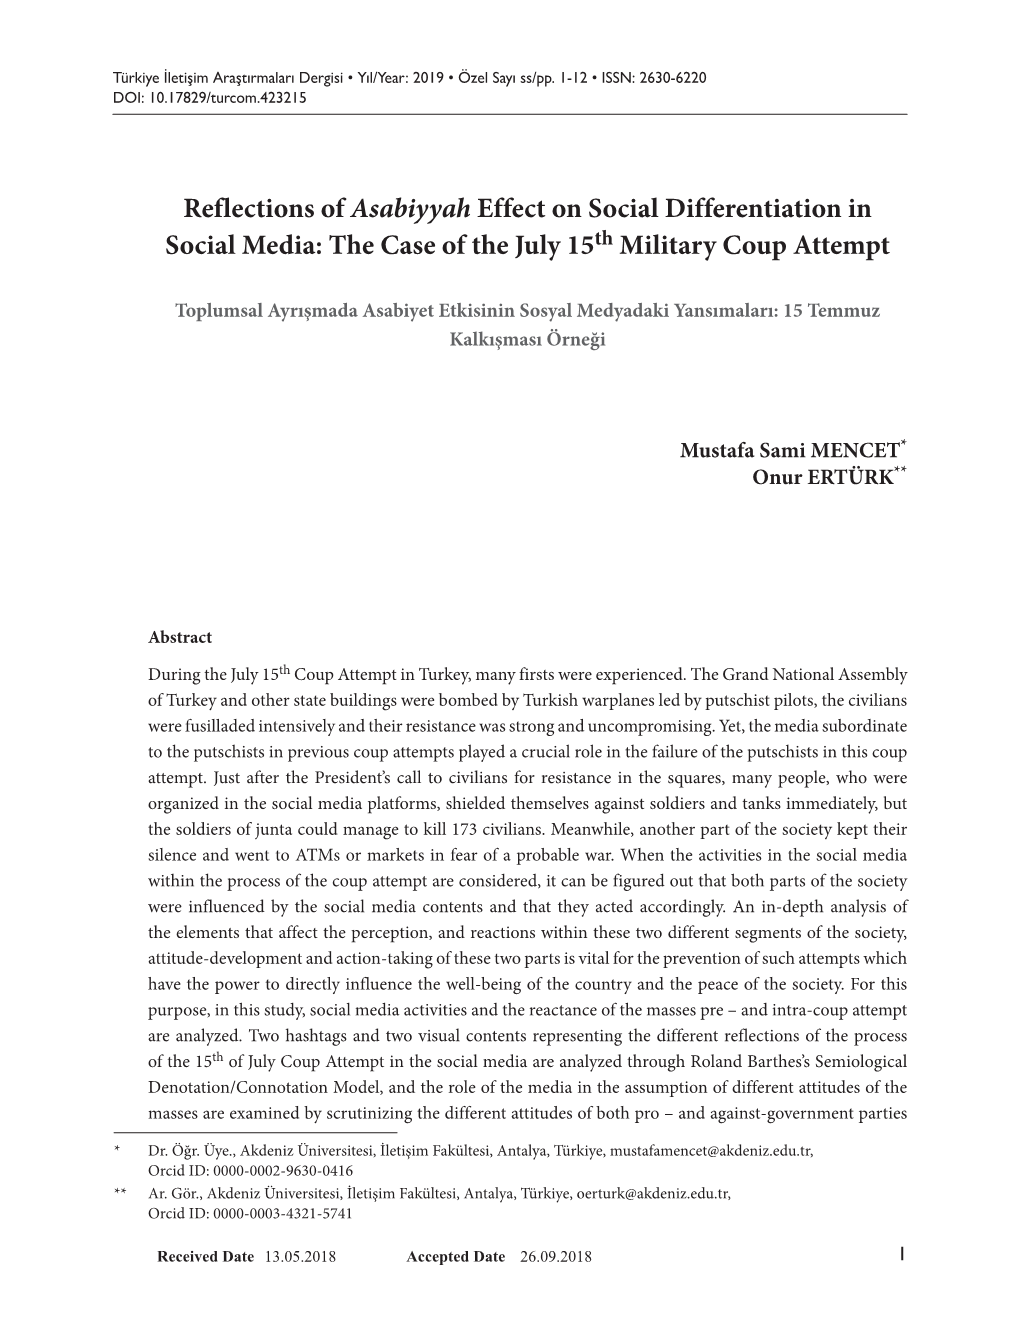 Reflections of Asabiyyah Effect on Social Differentiation in Social Media: the Case of the July 15Th Military Coup Attempt